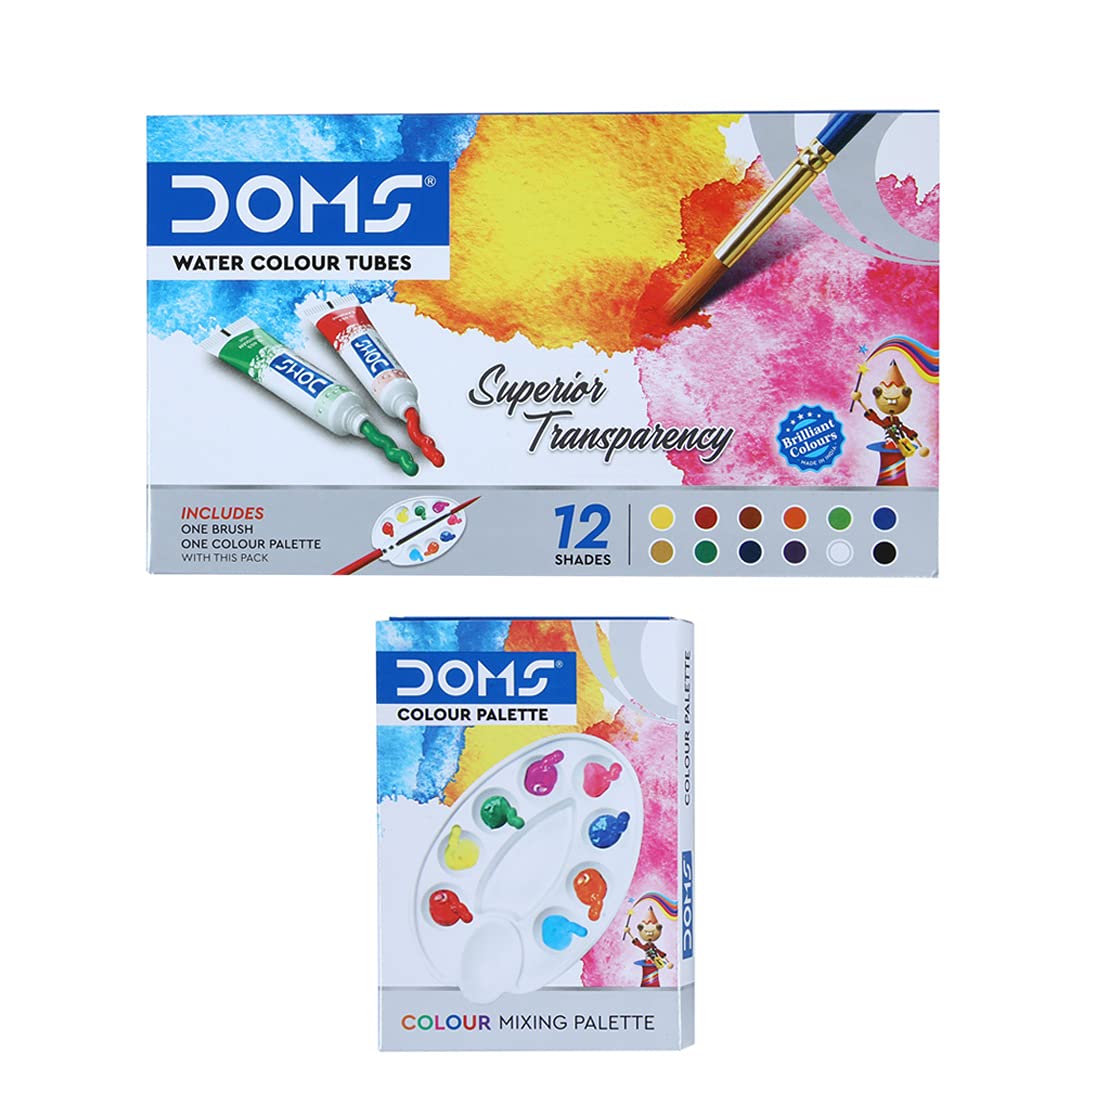 Doms 12 Shades Water Color Tube Set